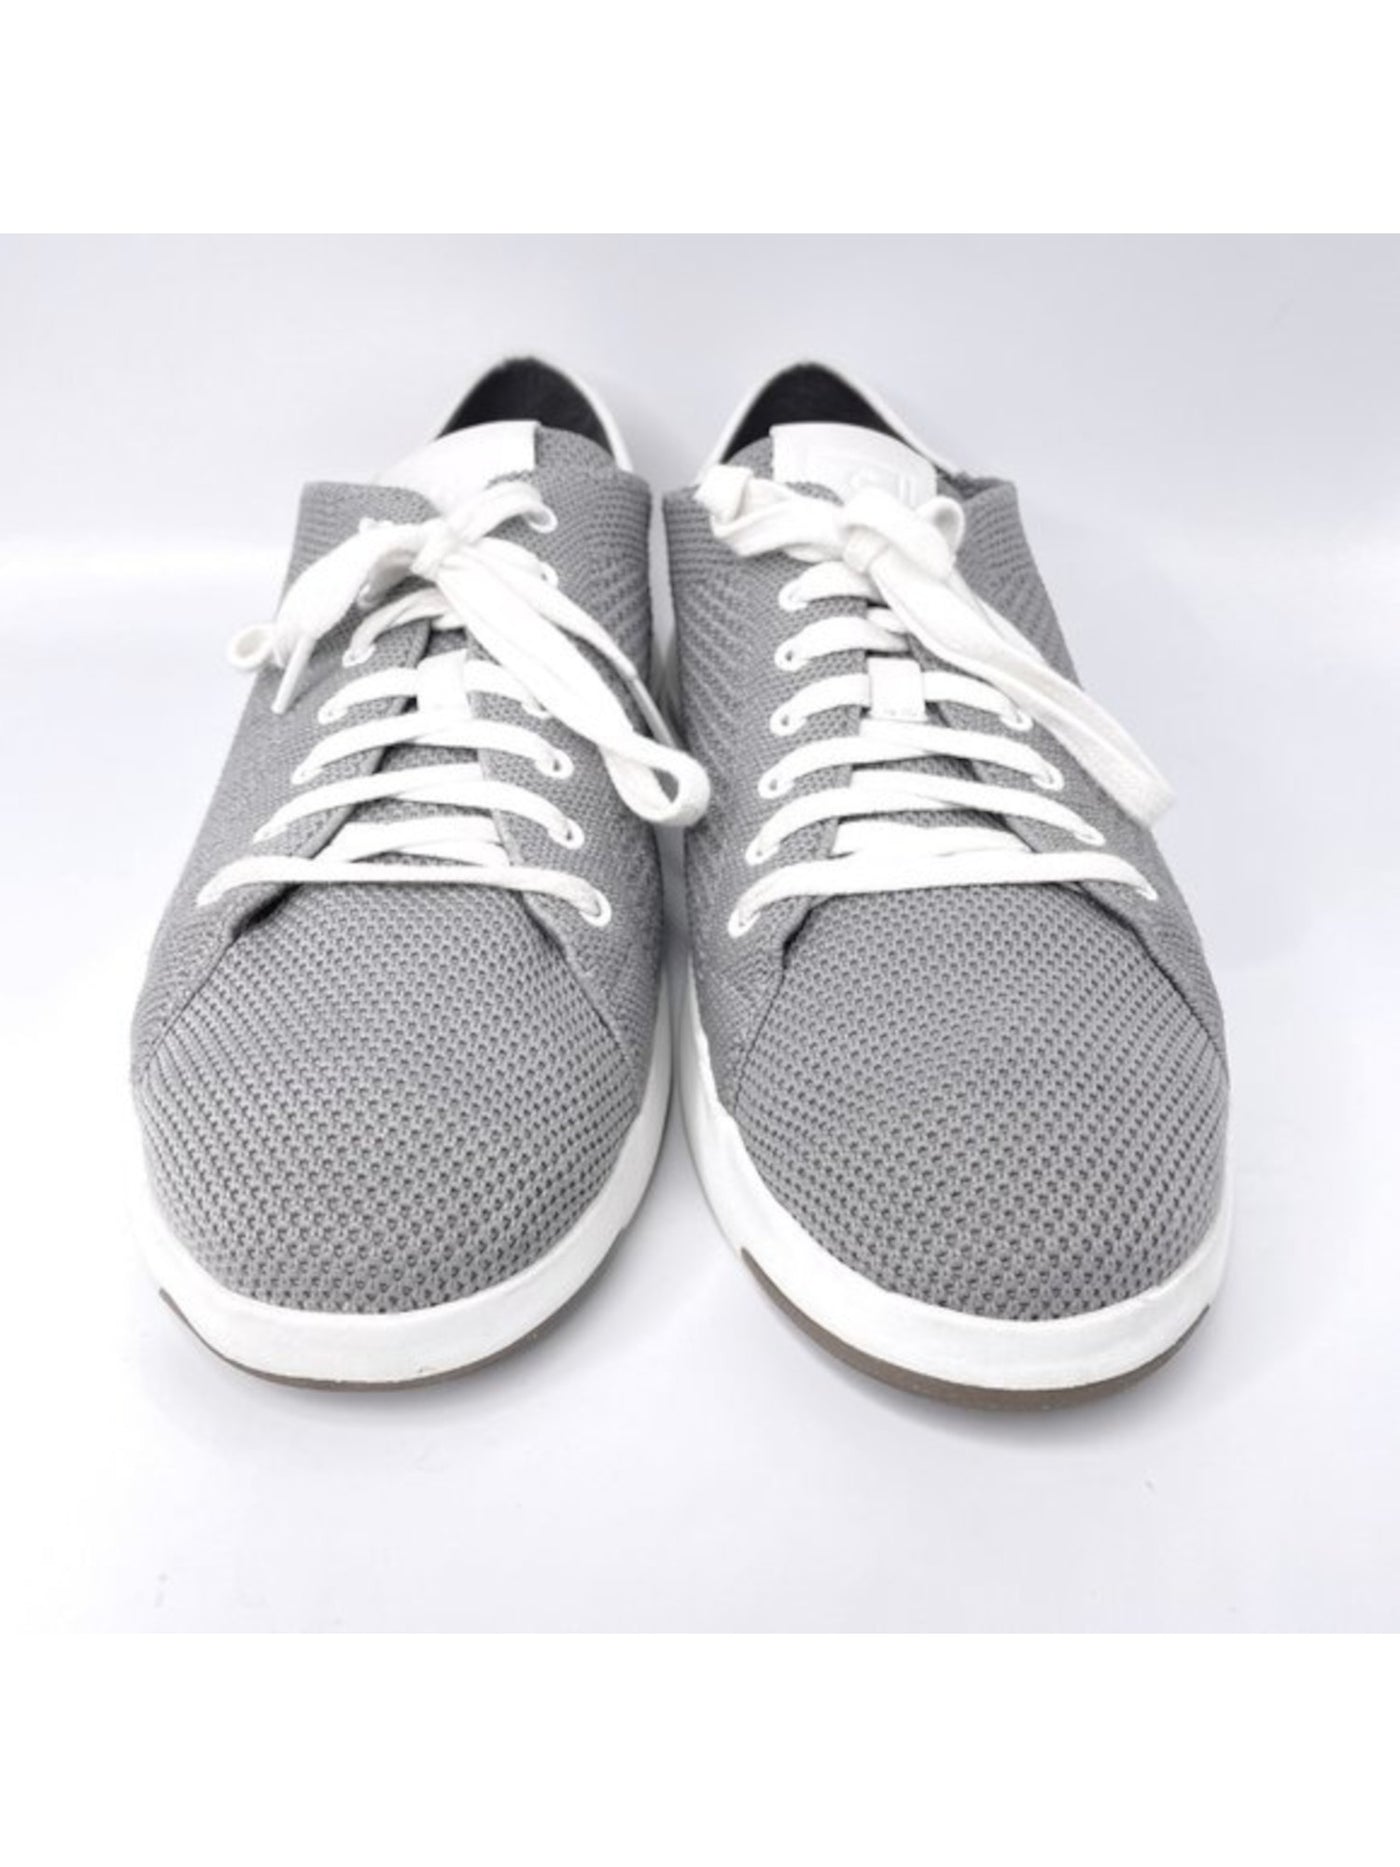 COLE HAAN Mens Gray Knit Breathable Lightweight Stitchlite Round Toe Platform Lace-Up Athletic Sneakers Shoes 8.5 M